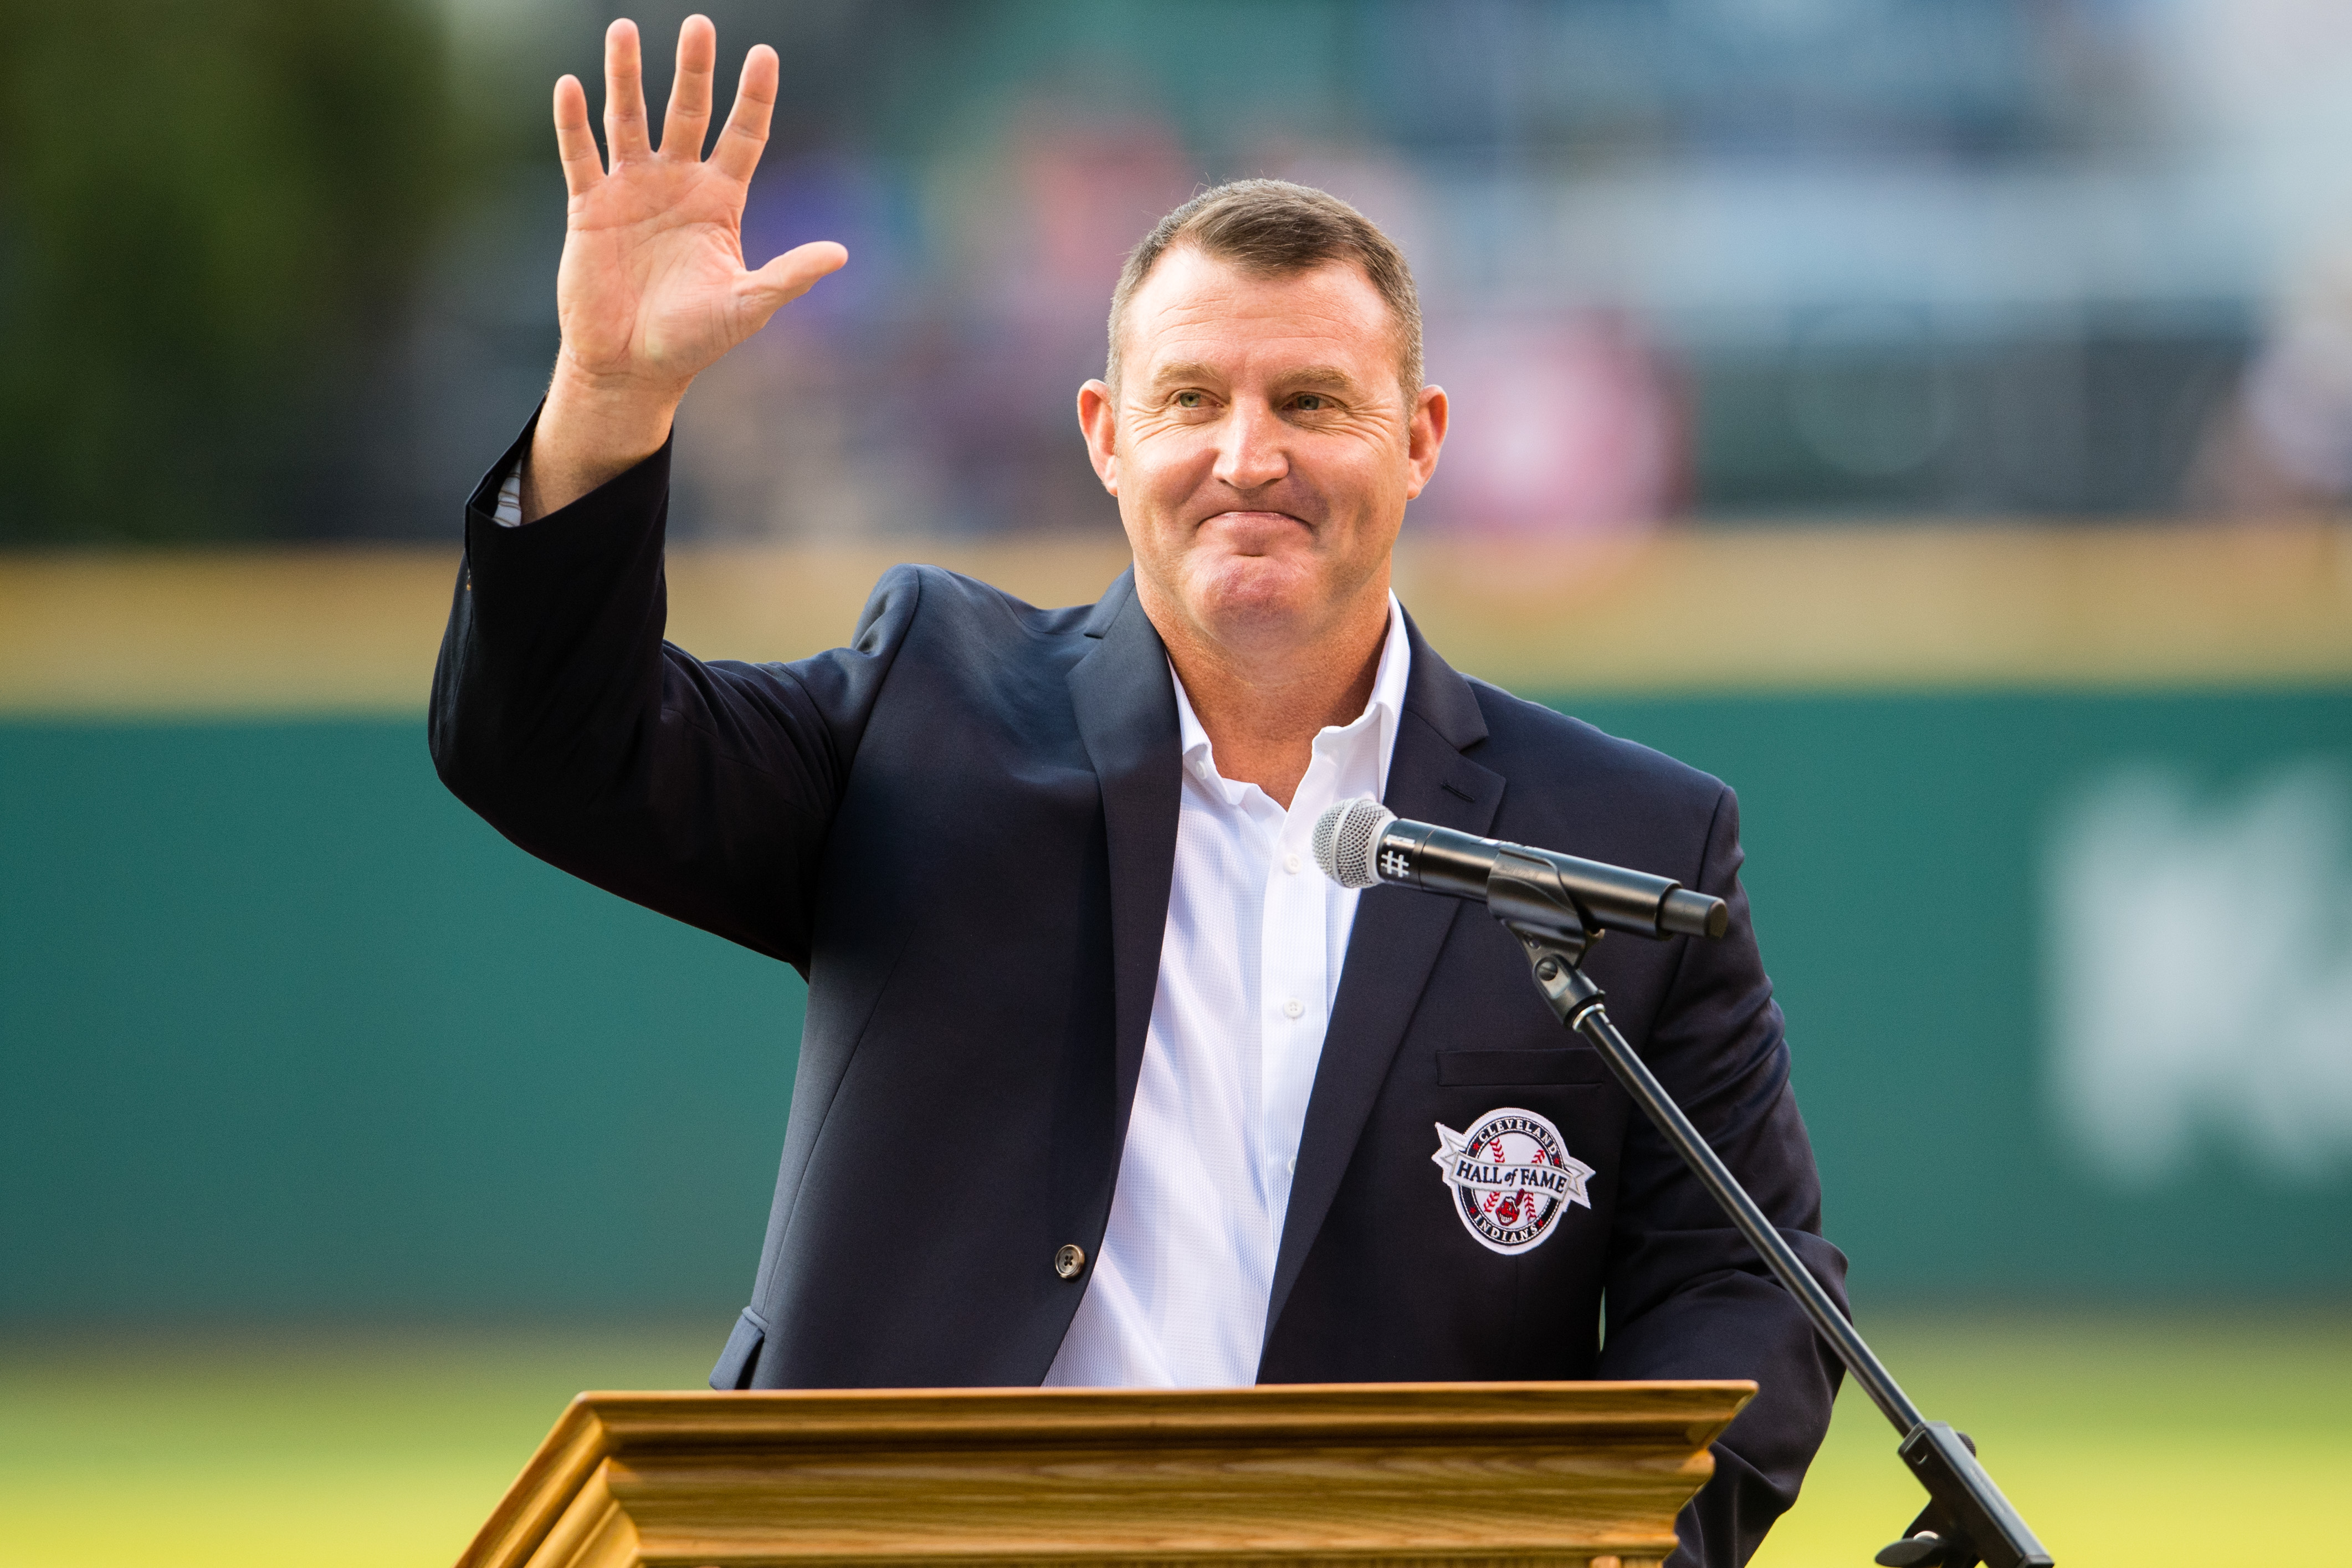 Jim Thome - Musial Awards